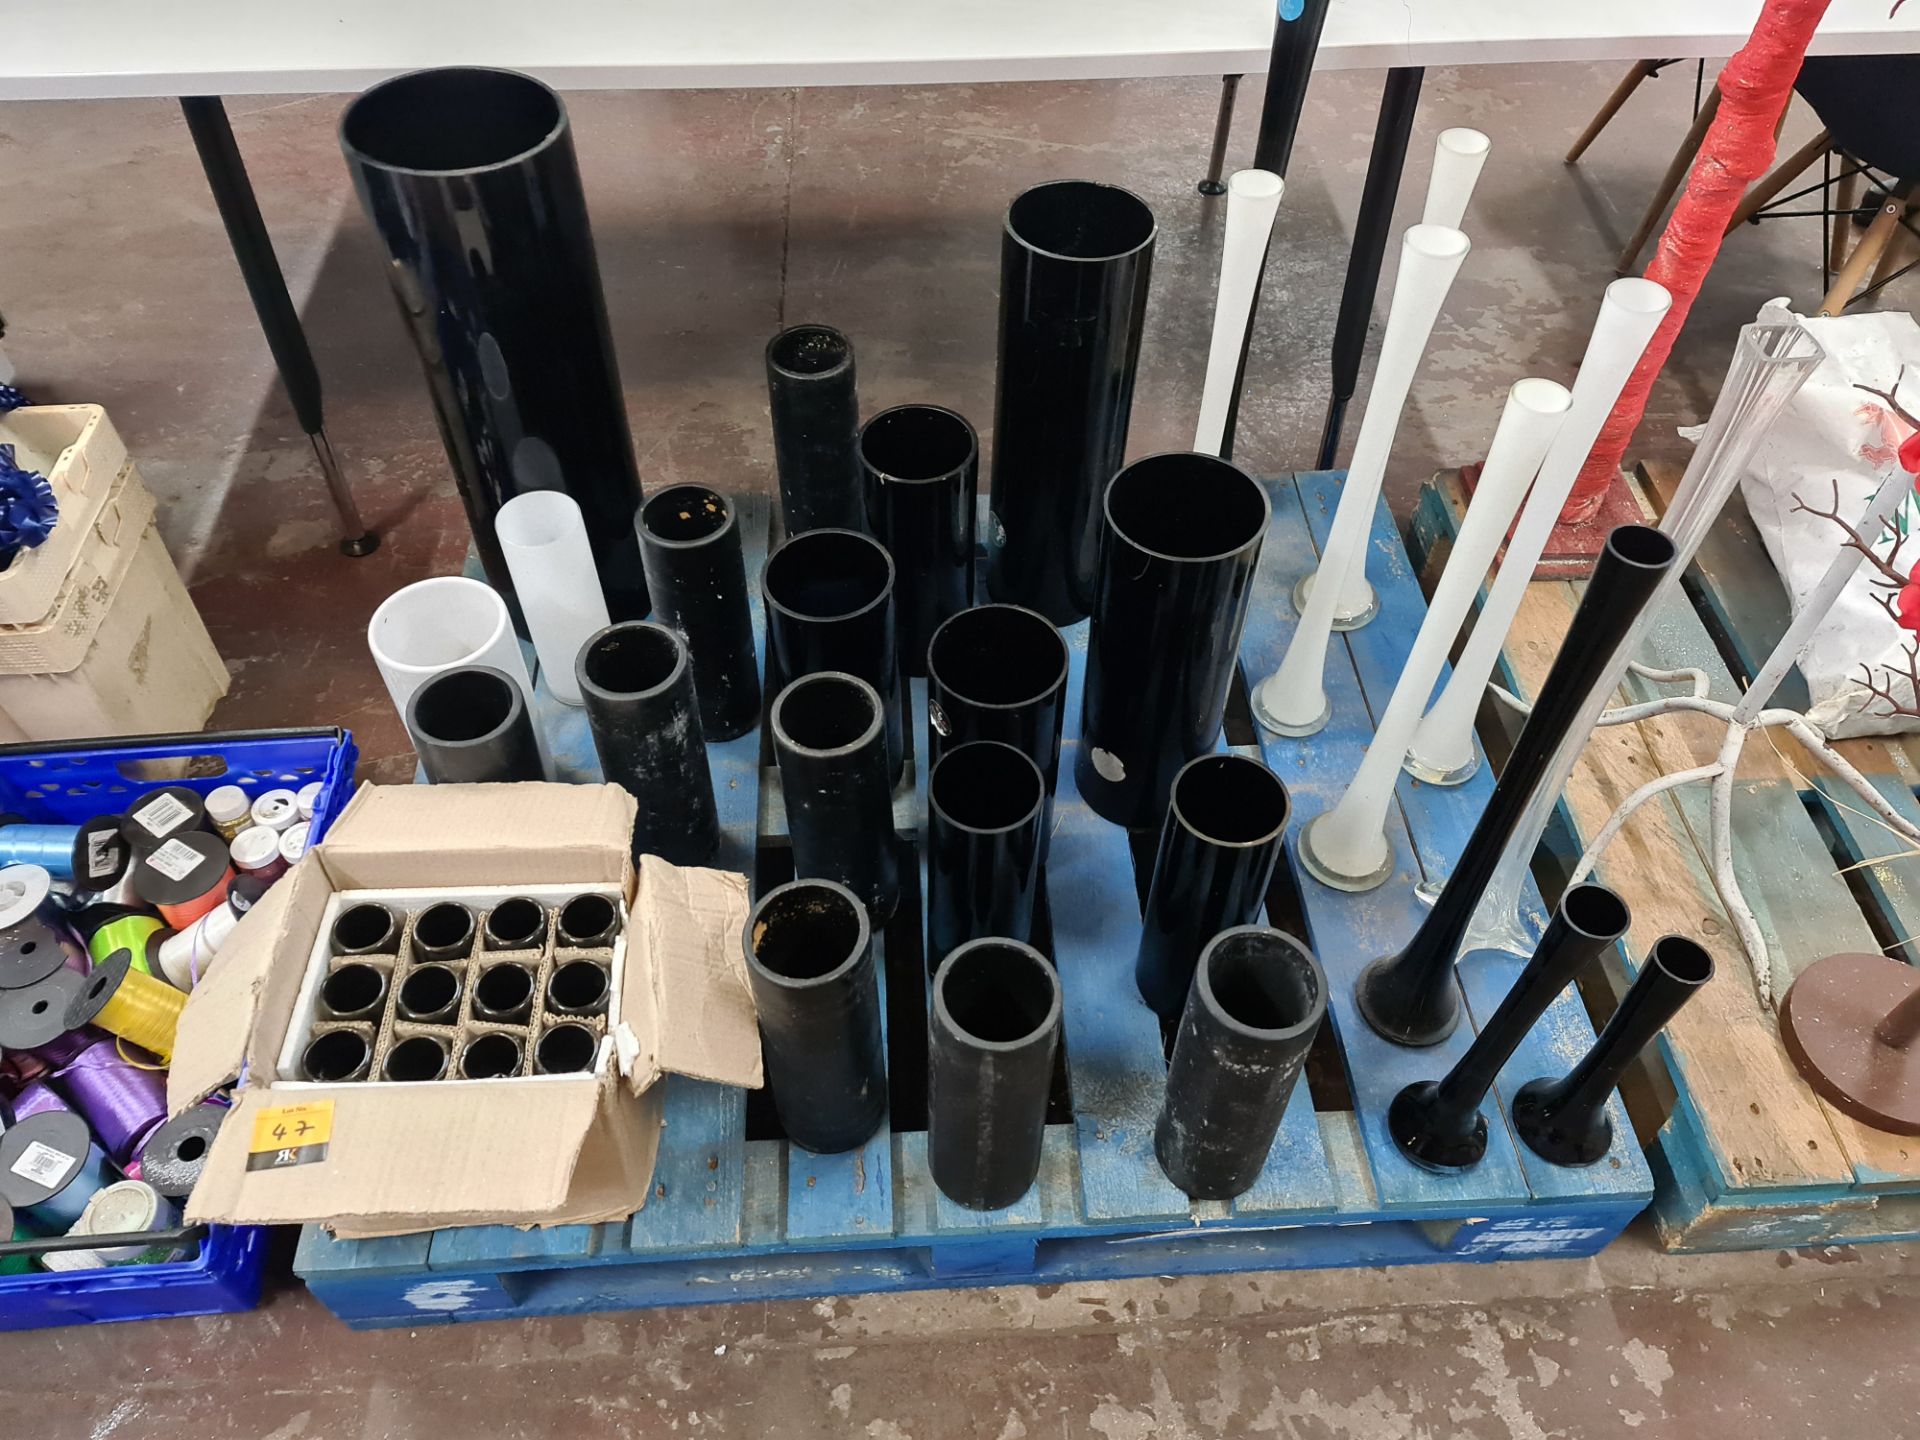 Quantity of glass and ceramic vases in black, white and clear finishes - the contents of a pallet -